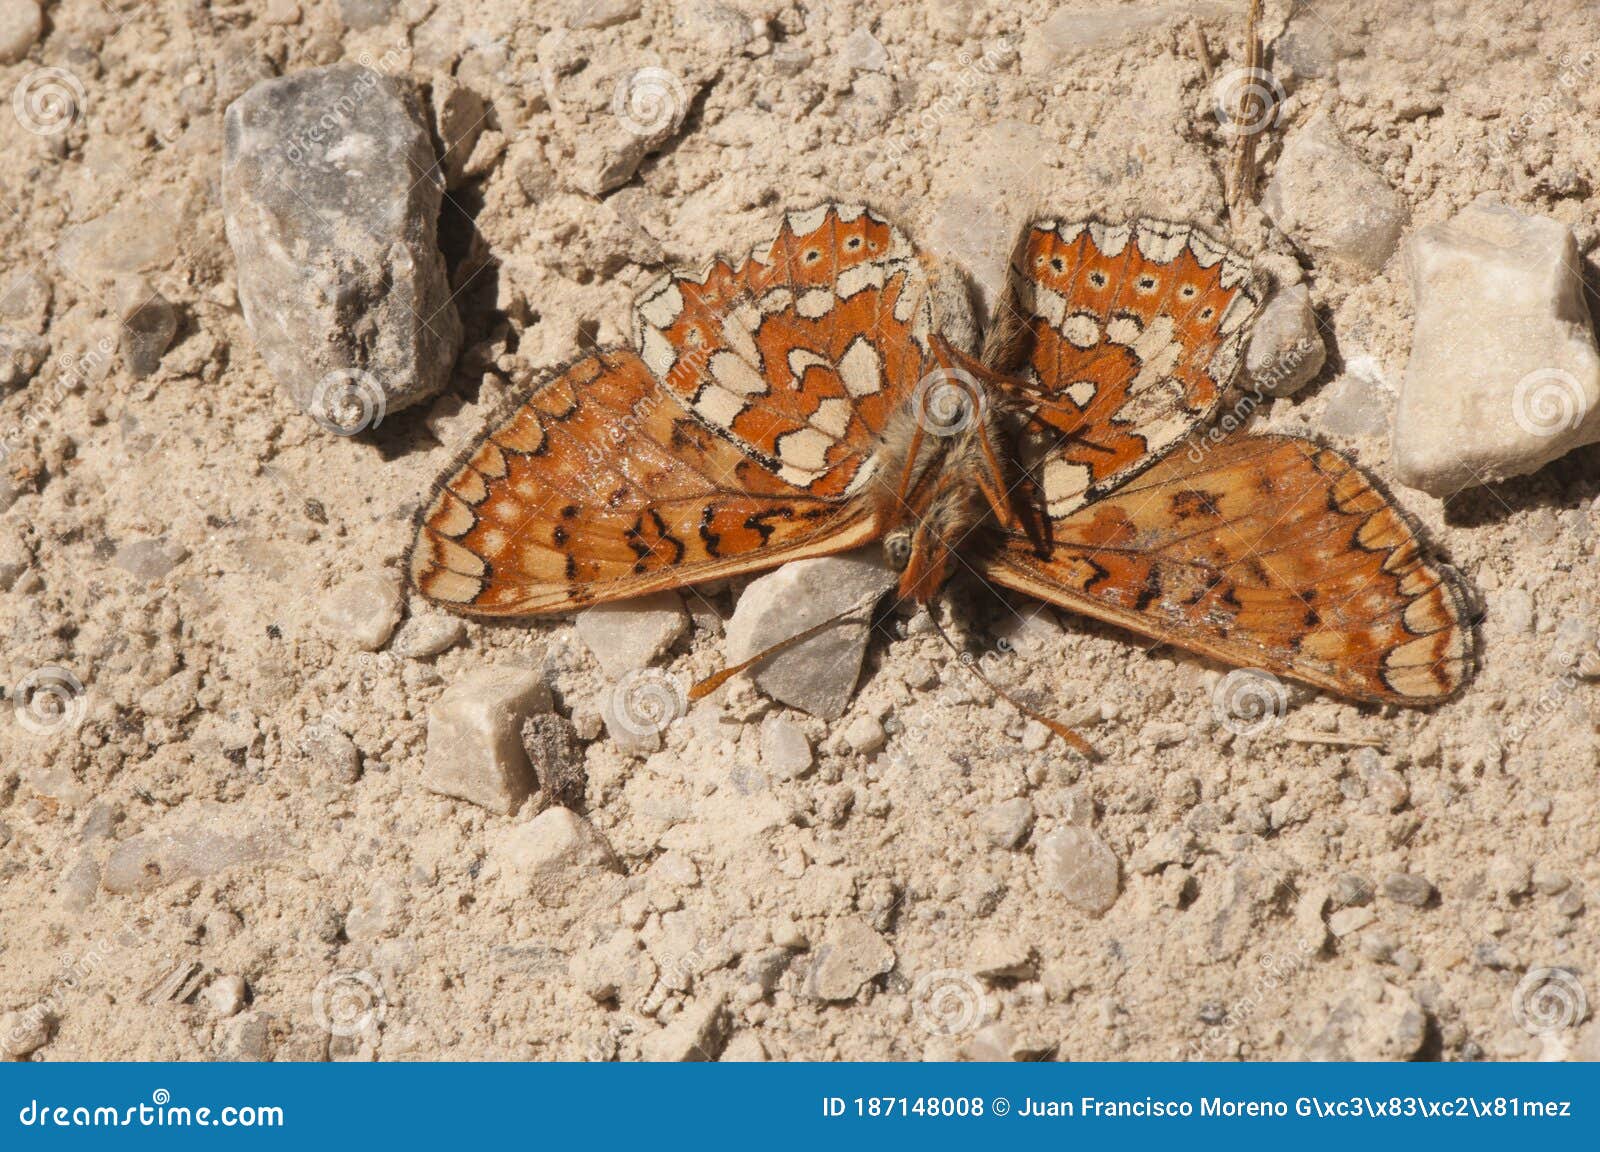 corpse of euphydryas aurinia marsh fritillary dead in the middle of a dirt road